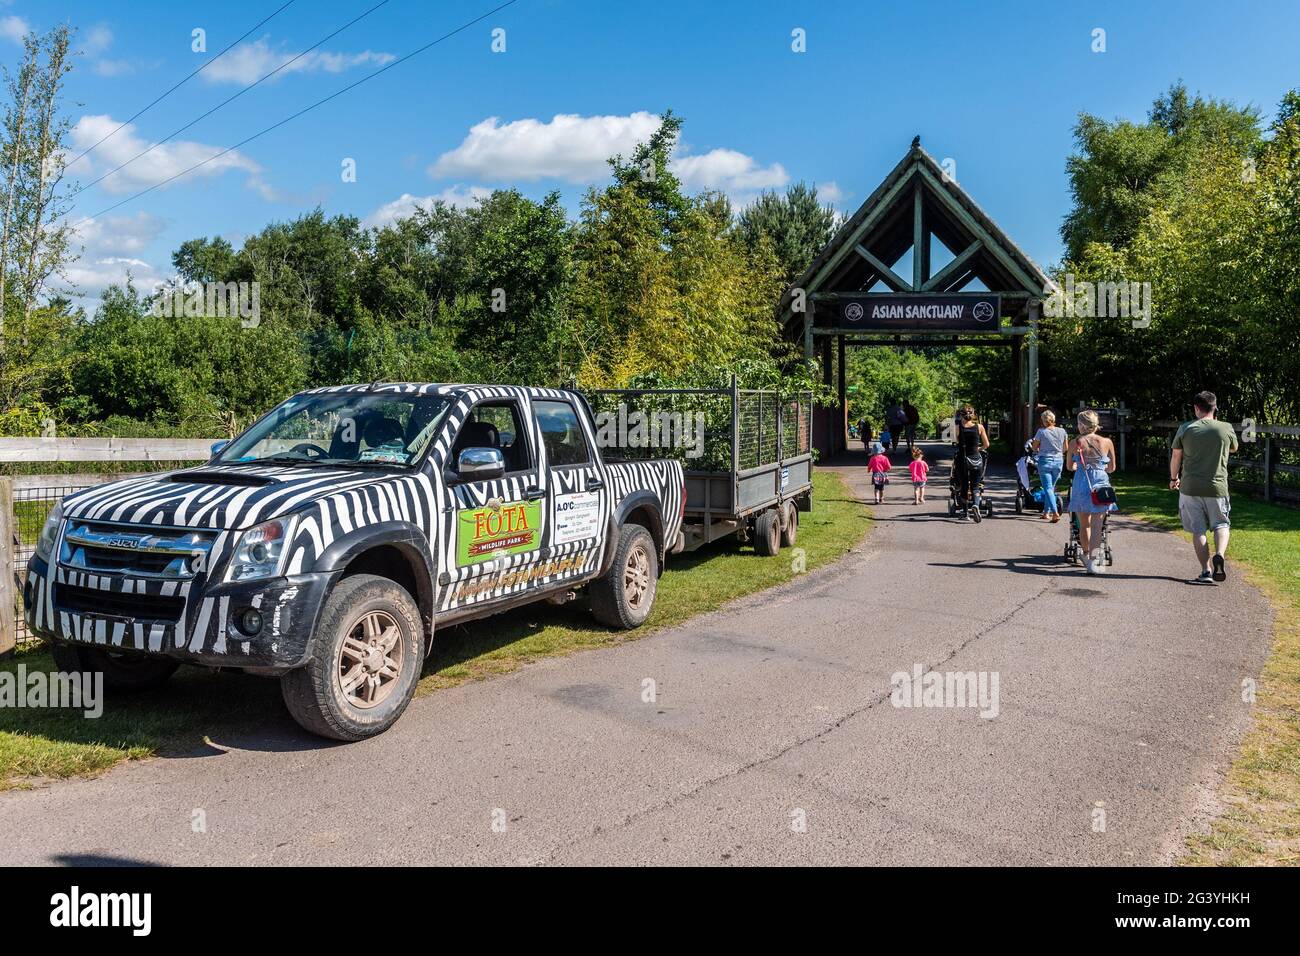 Cobh, County Cork, Ireland. 18th June, 2021. The sunny weather brought out lots of visitors to Fota Wildlife Park in Co. Cork today. Credit: AG News/Alamy Live News. Stock Photo